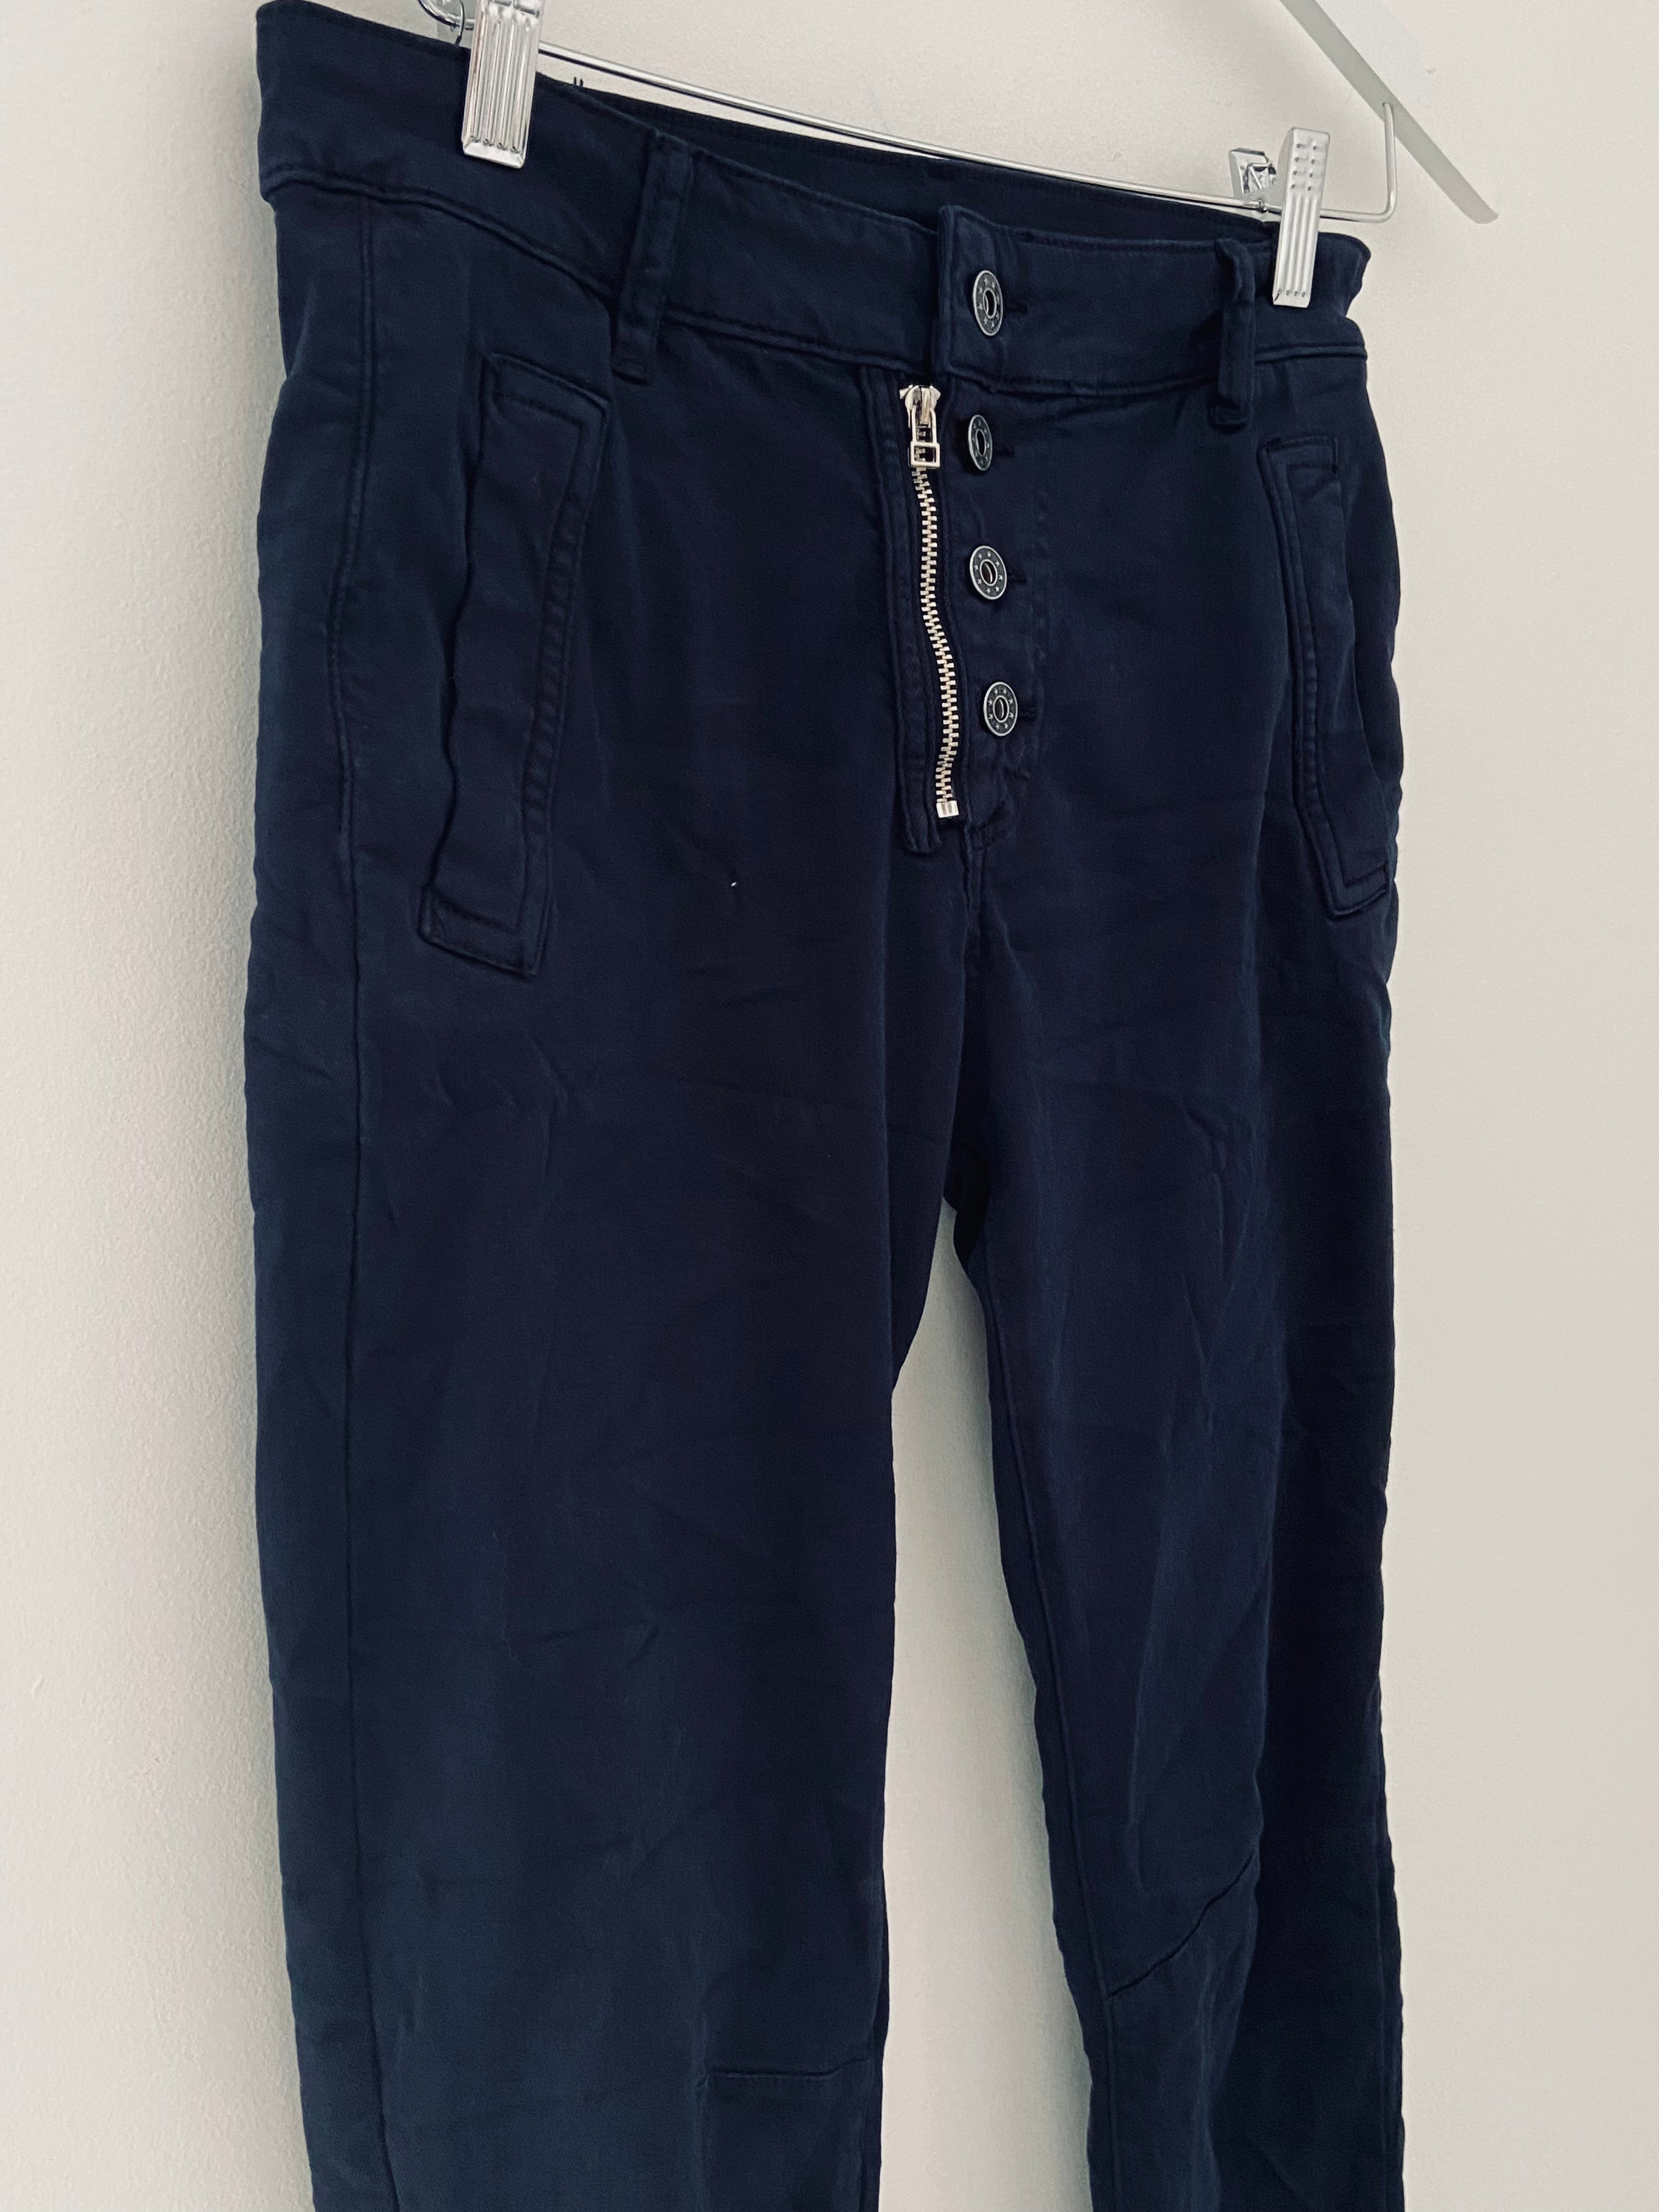 Button & Zip Fly Stretch Jeans in Ink